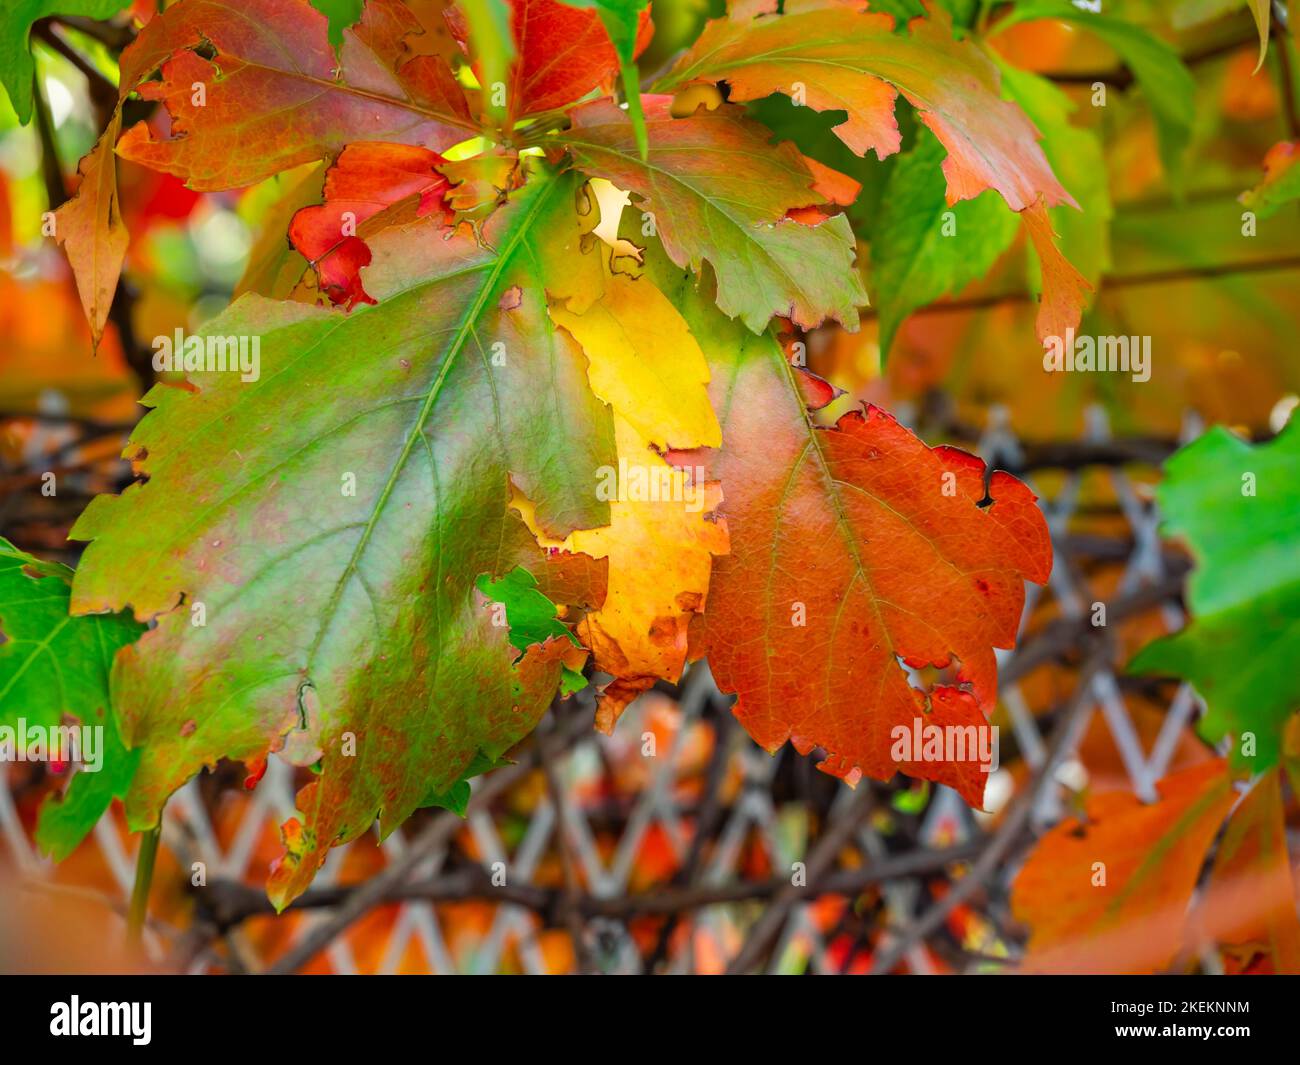 Colorful fence primarily Red Autumnal leaves Stock Photo